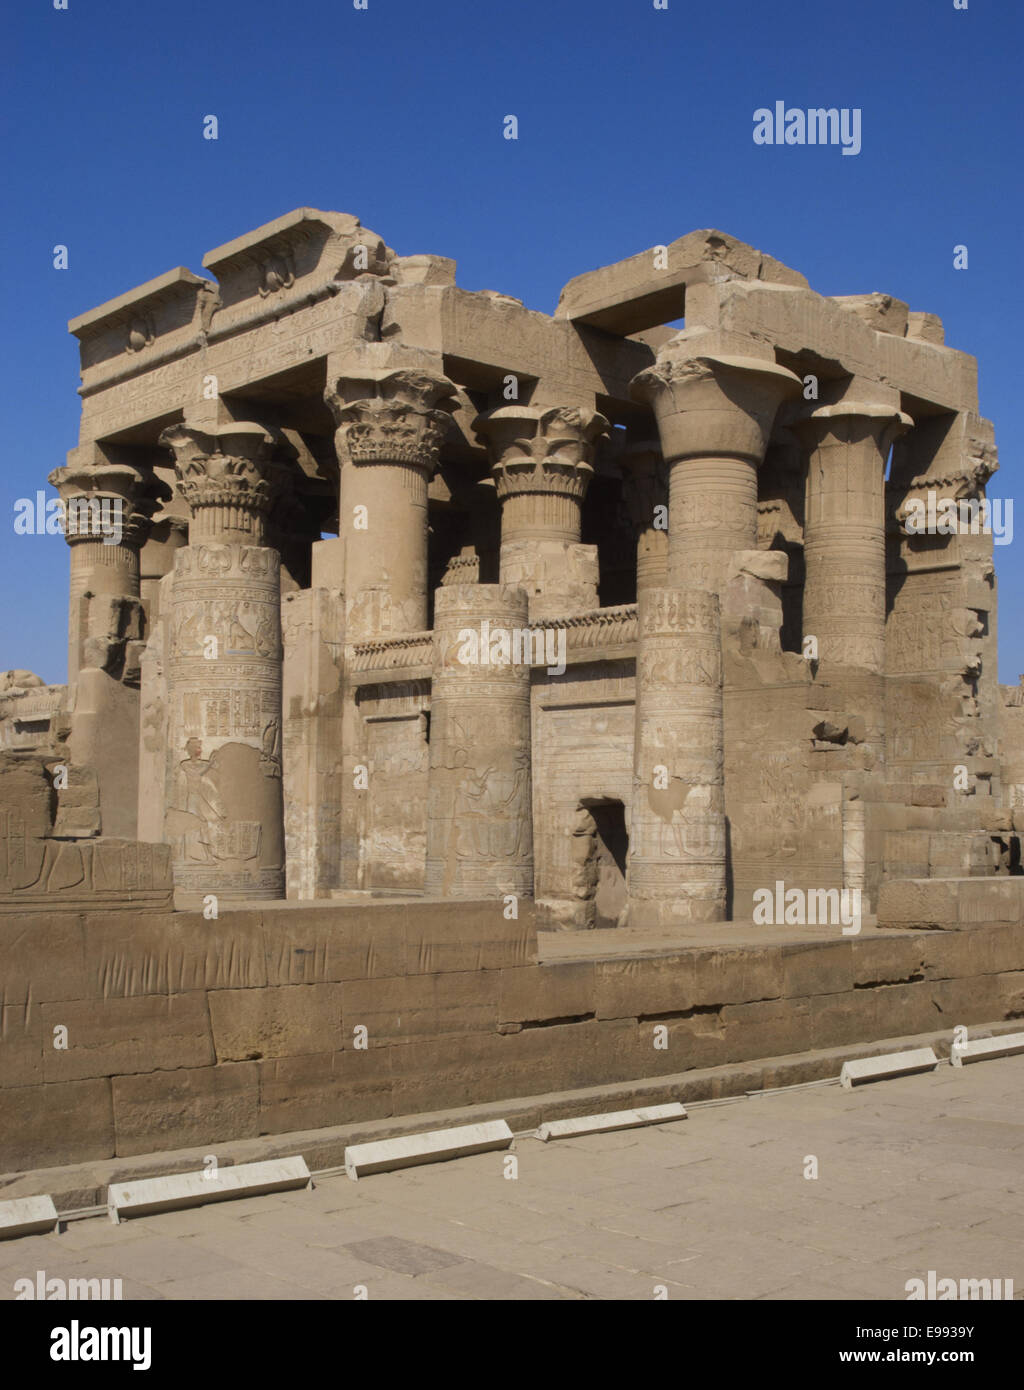 Egyptian Art. Temple of Kom Ombo. Ptolemaic Dynasty. 2nd century B.C. Papyrus columns. Outside view. Stock Photo